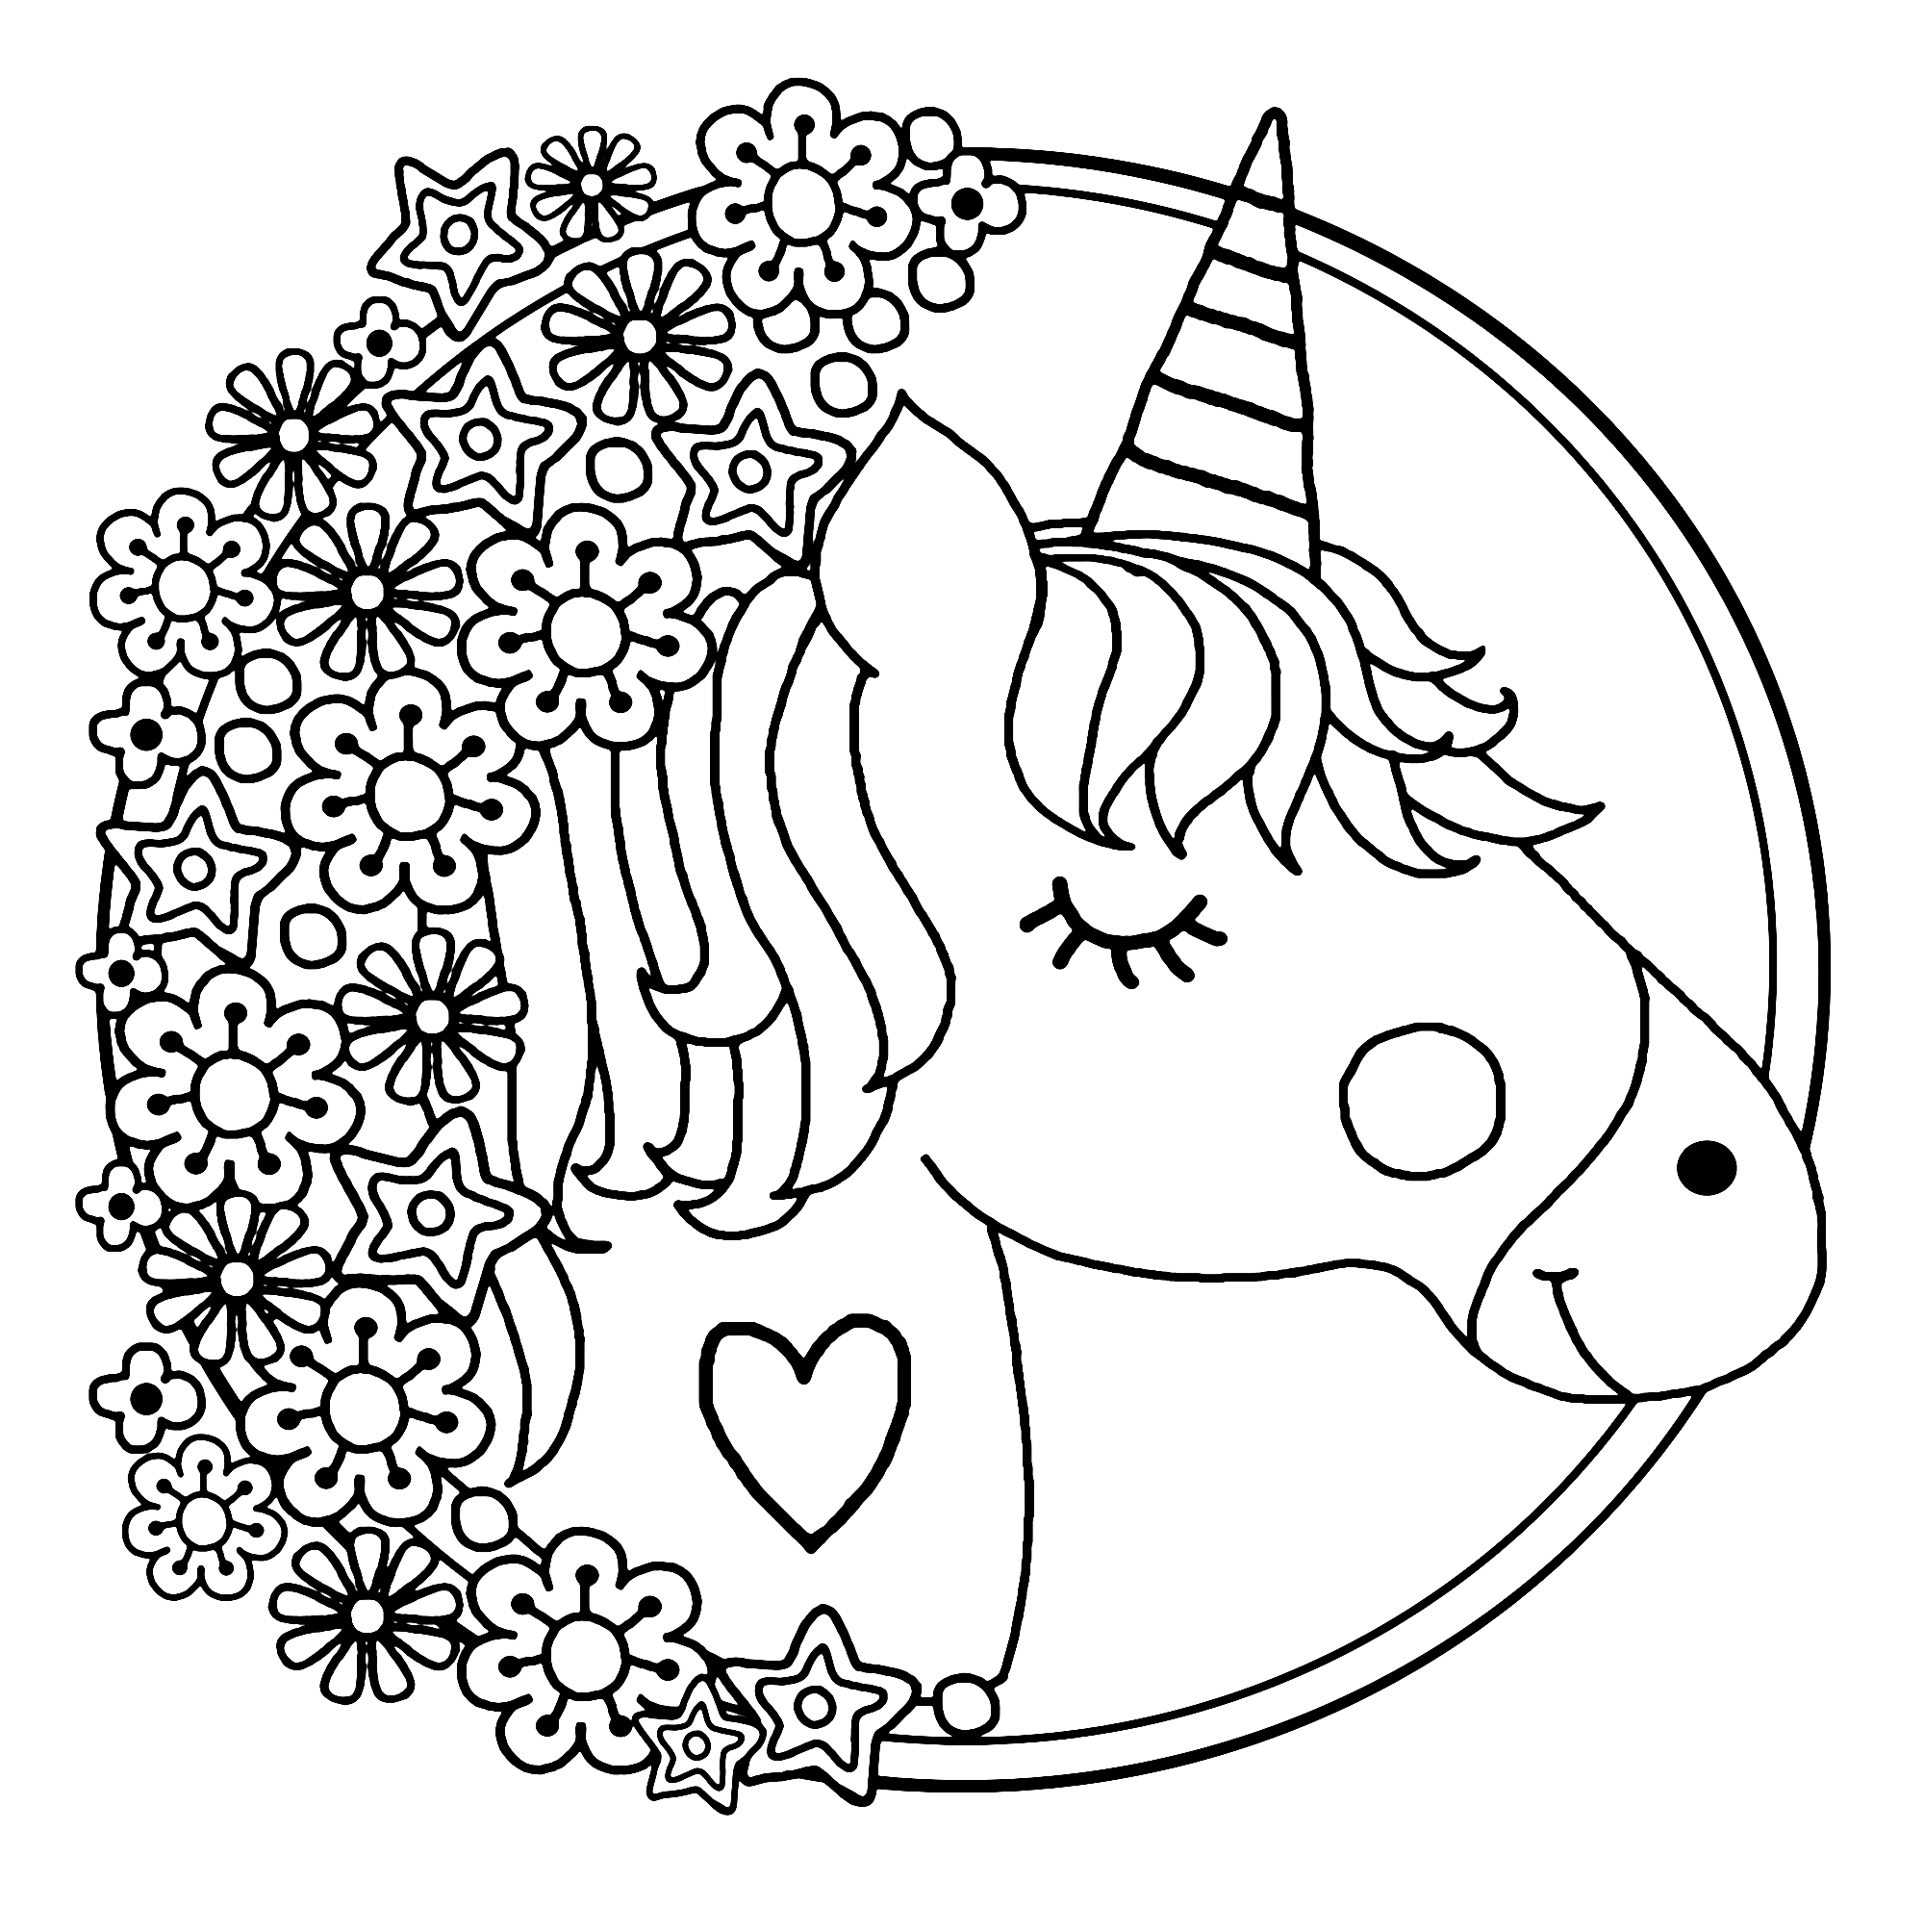 Adorable Unicorn Coloring Pages for Girls and Adults ...